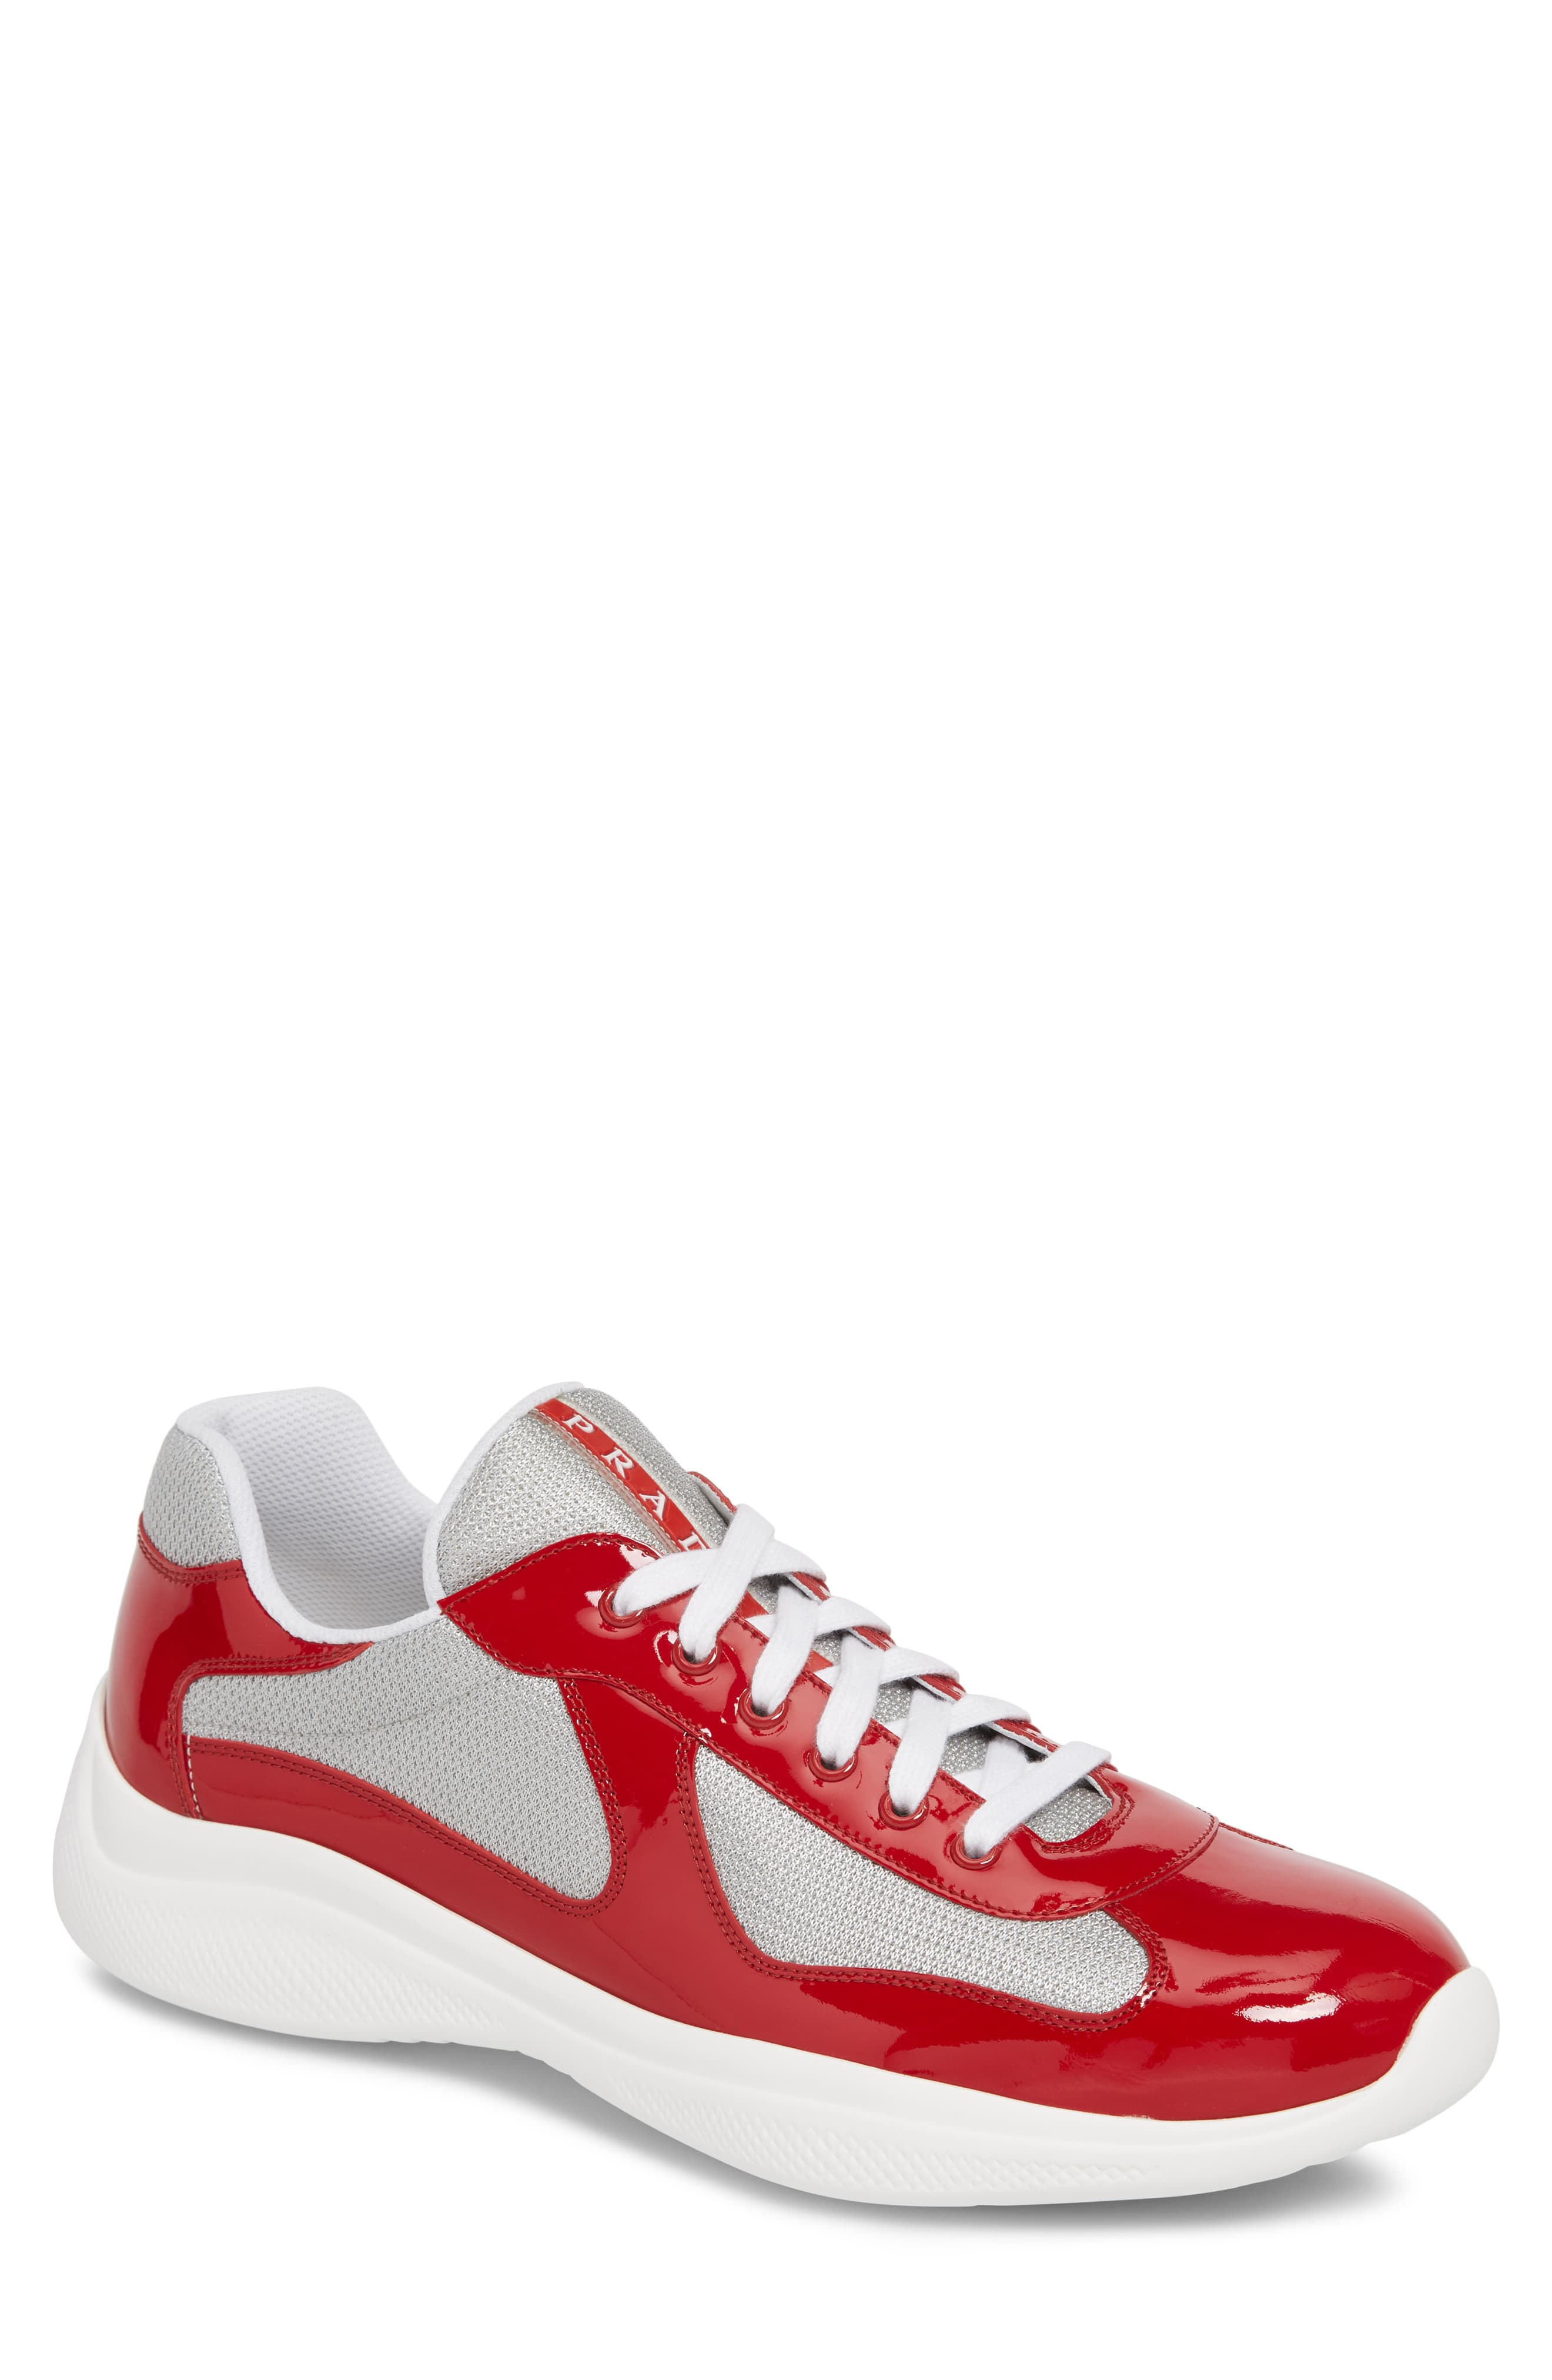 red patent leather prada sneakers